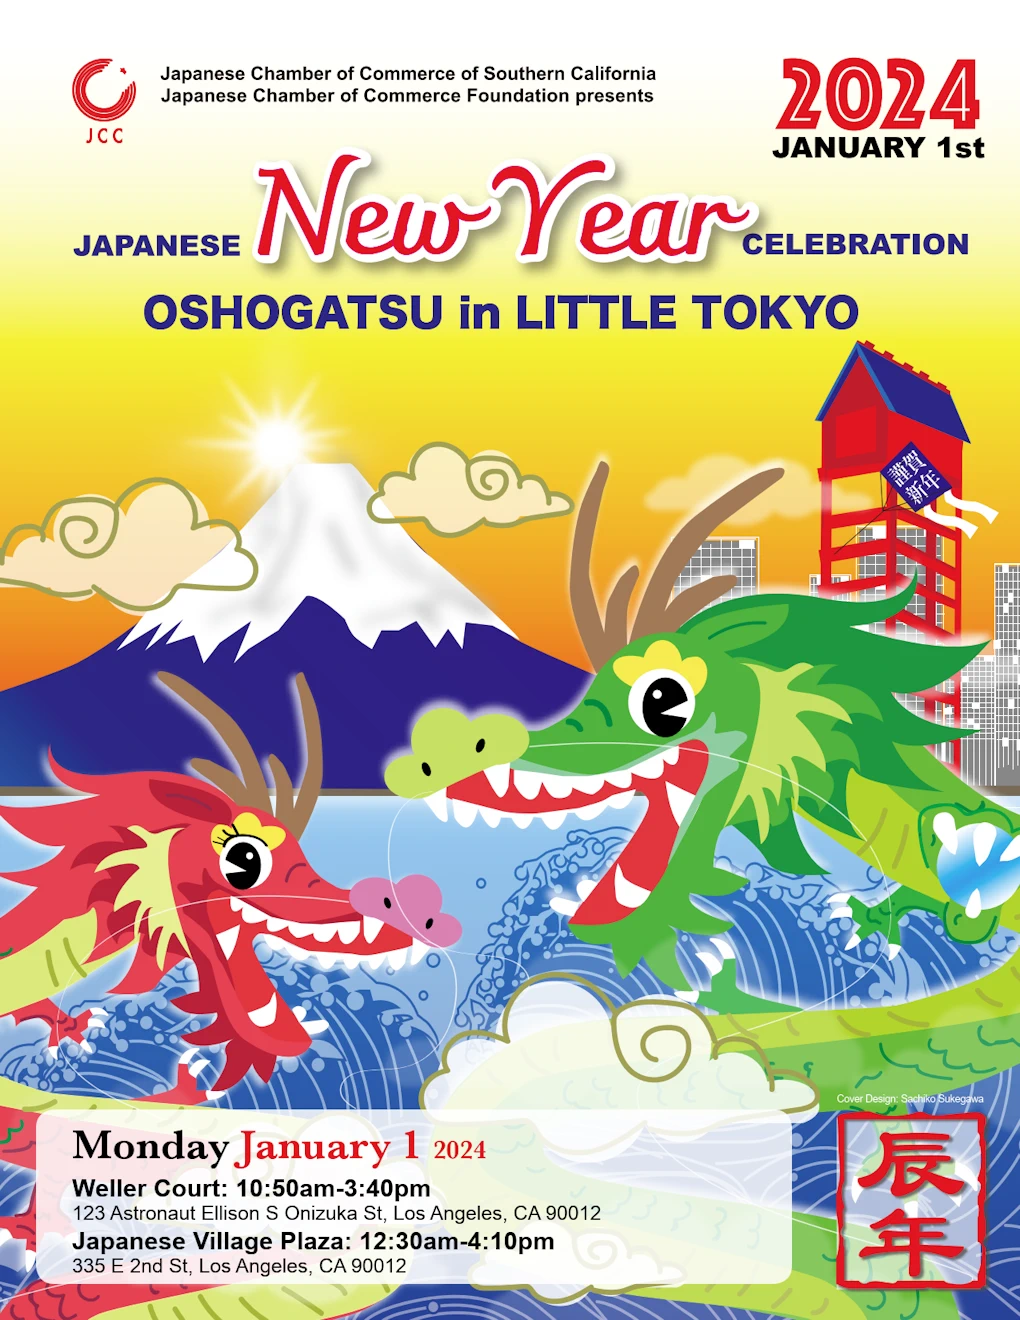 2023 - 24th Annual Japanese New Year's Oshogatsu Festival-Little Tokyo (2 Locations, 2 Days: Dec 31st & Jan 1st) Entertainment (Updated!)